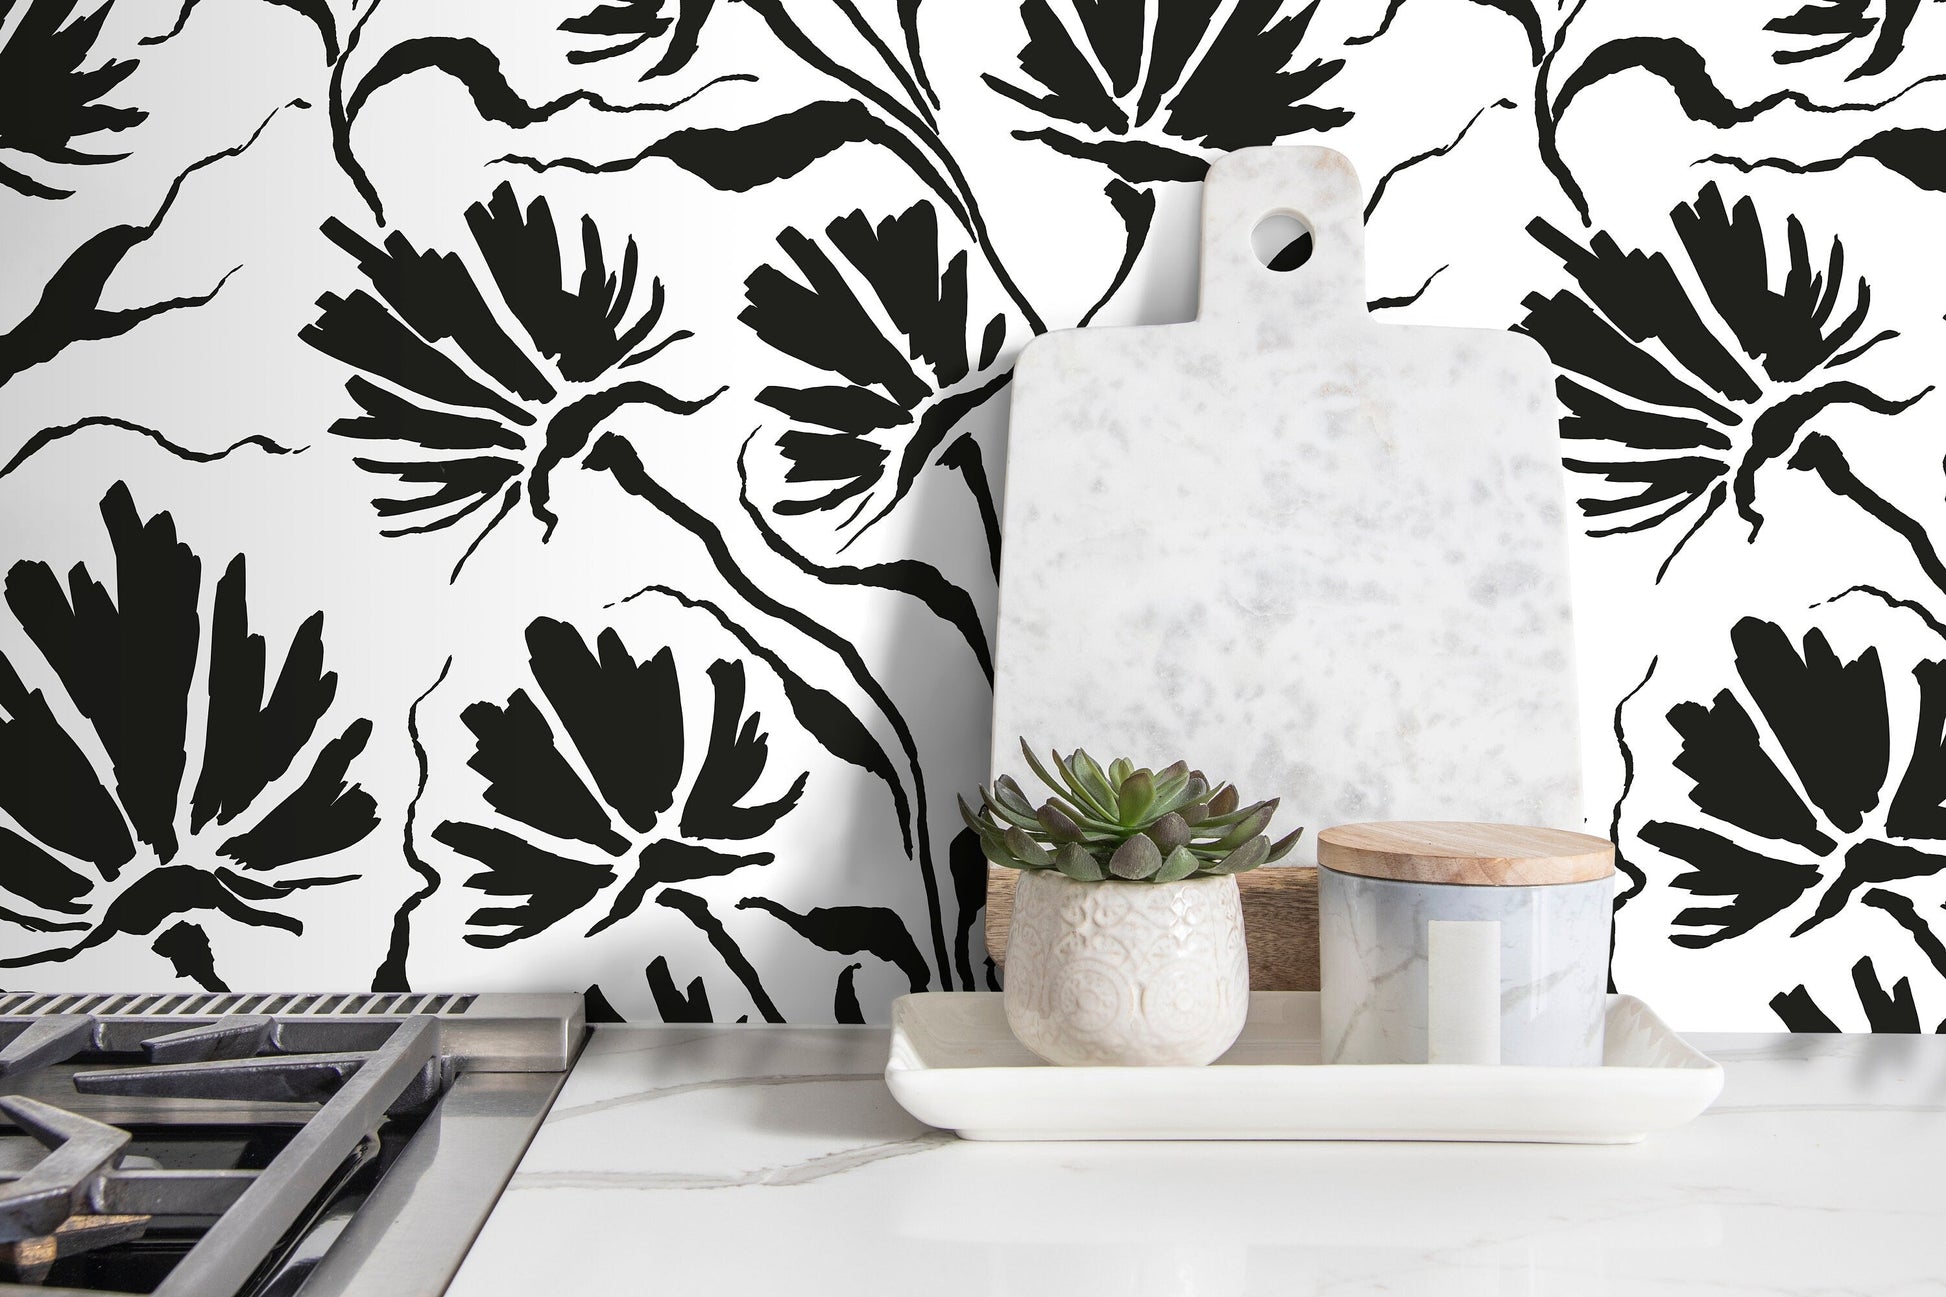 Black and White Leaf Wallpaper / Peel and Stick Wallpaper Removable Wallpaper Home Decor Wall Art Wall Decor Room Decor - C672